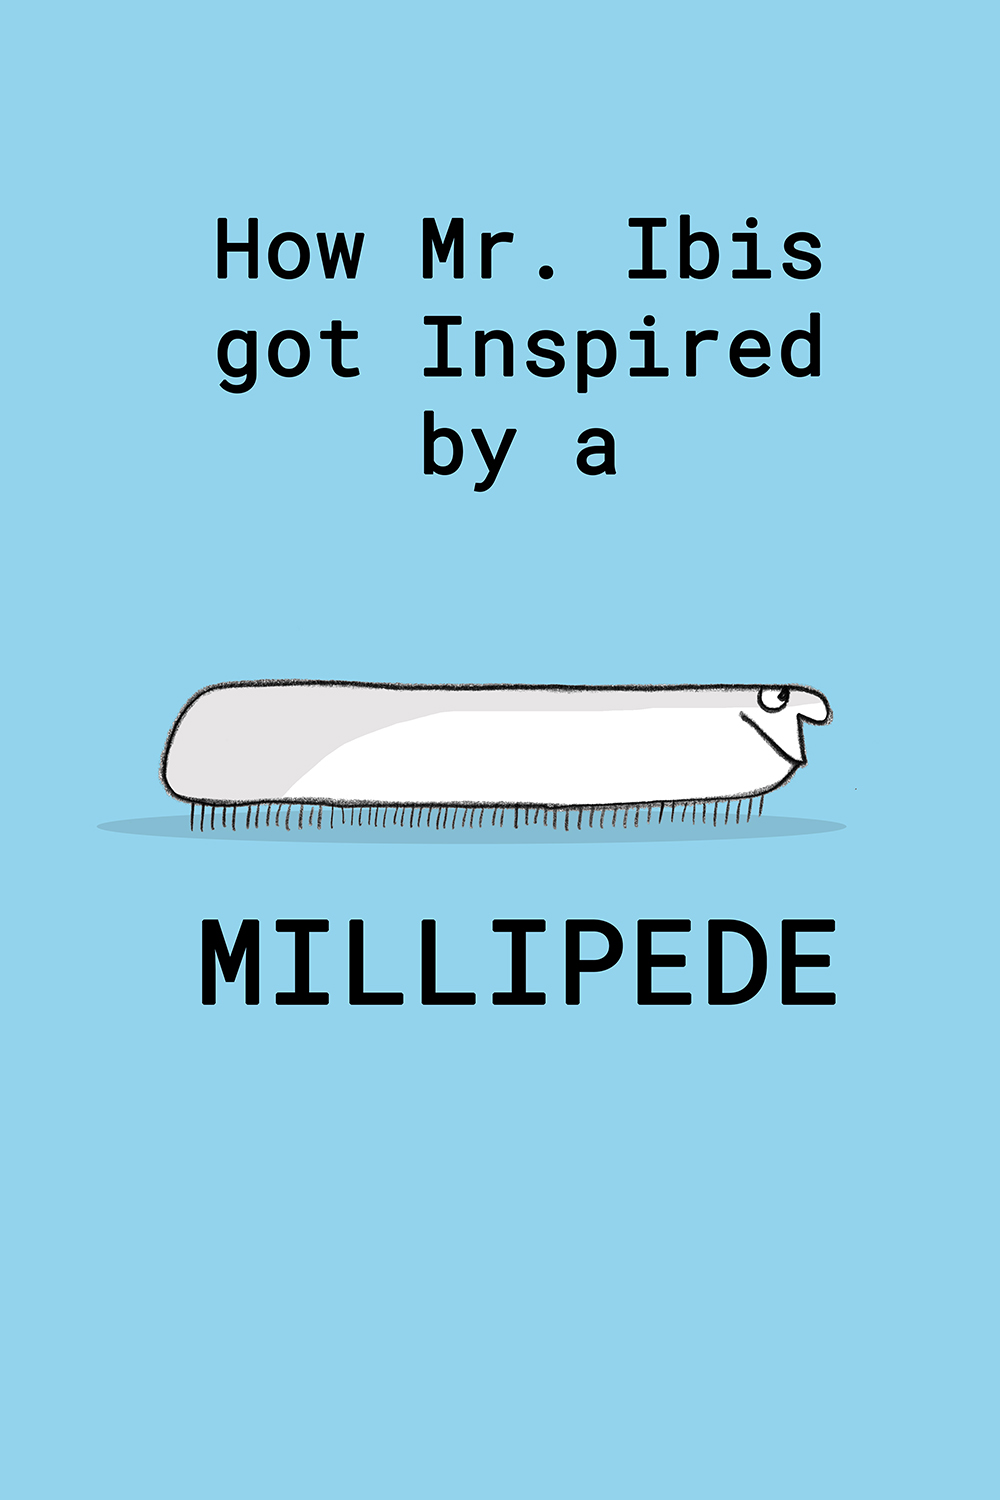 How Mr. Ibis Got Inspired by a Millipede